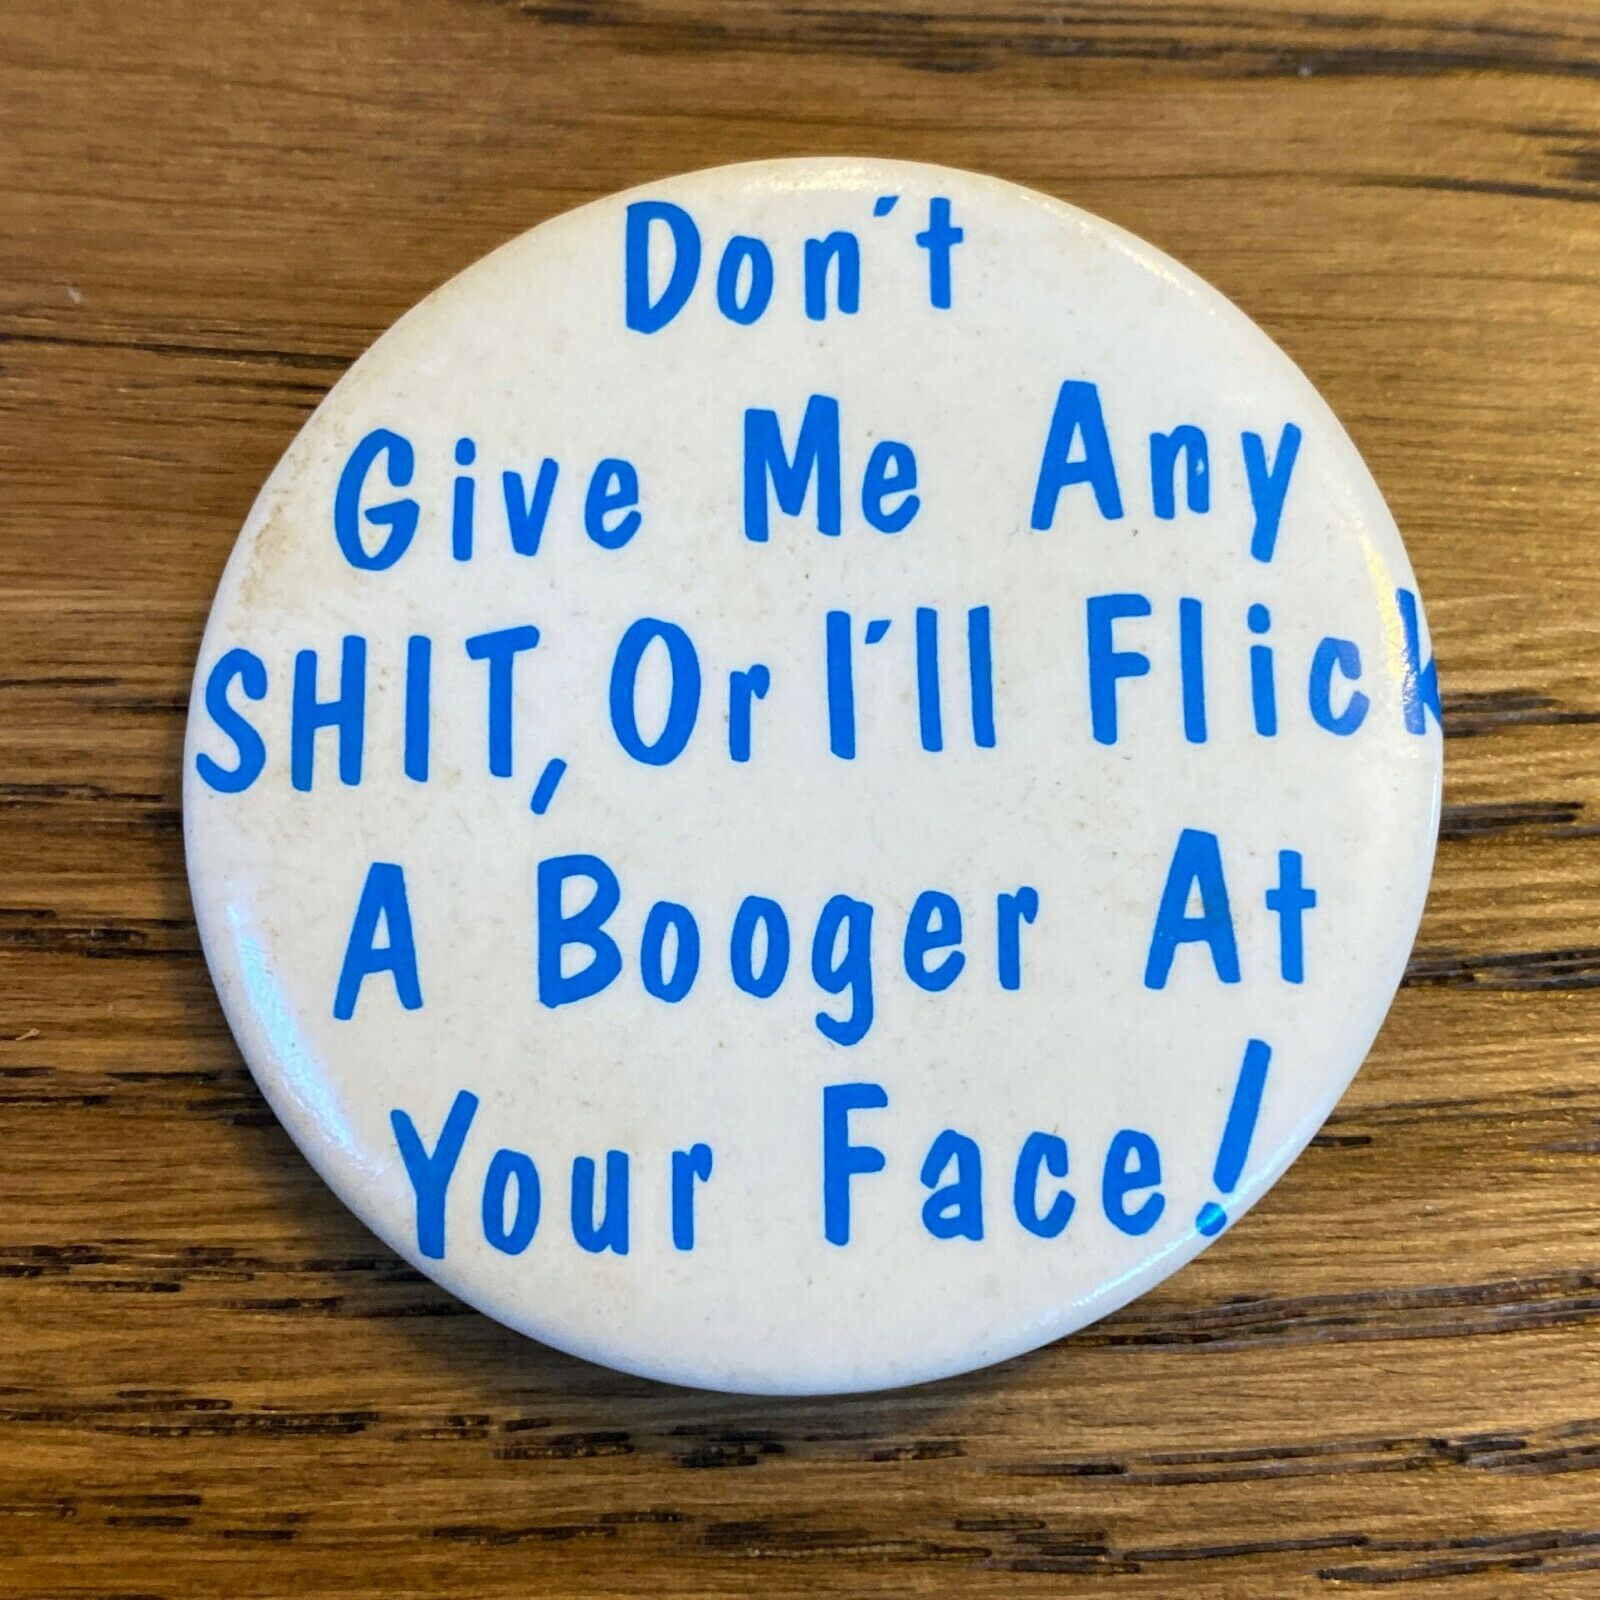 Vtg 80s Novelty Button Pinback Don't Give Me Any $hit I'll Flick A Booger Face